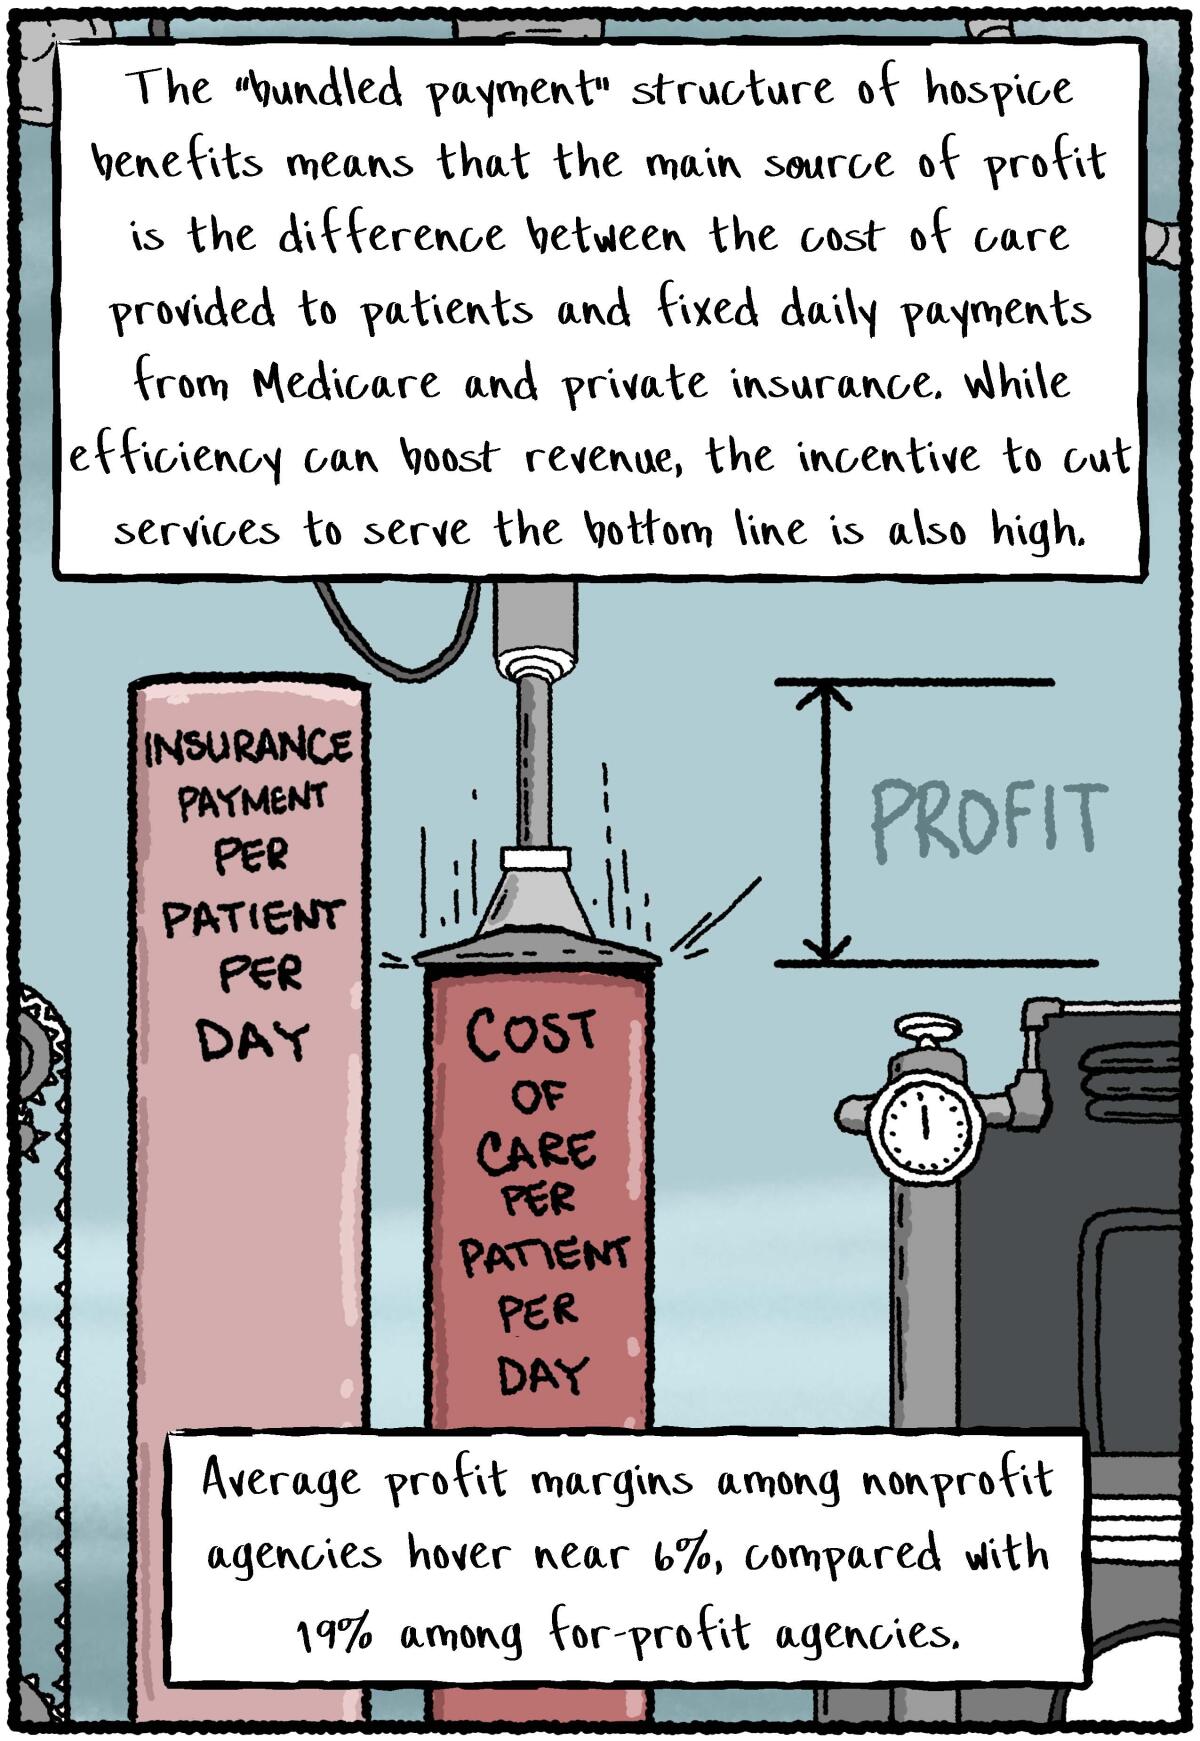 The main source of profit is the difference between cost of care and fixed daily insurance payments.